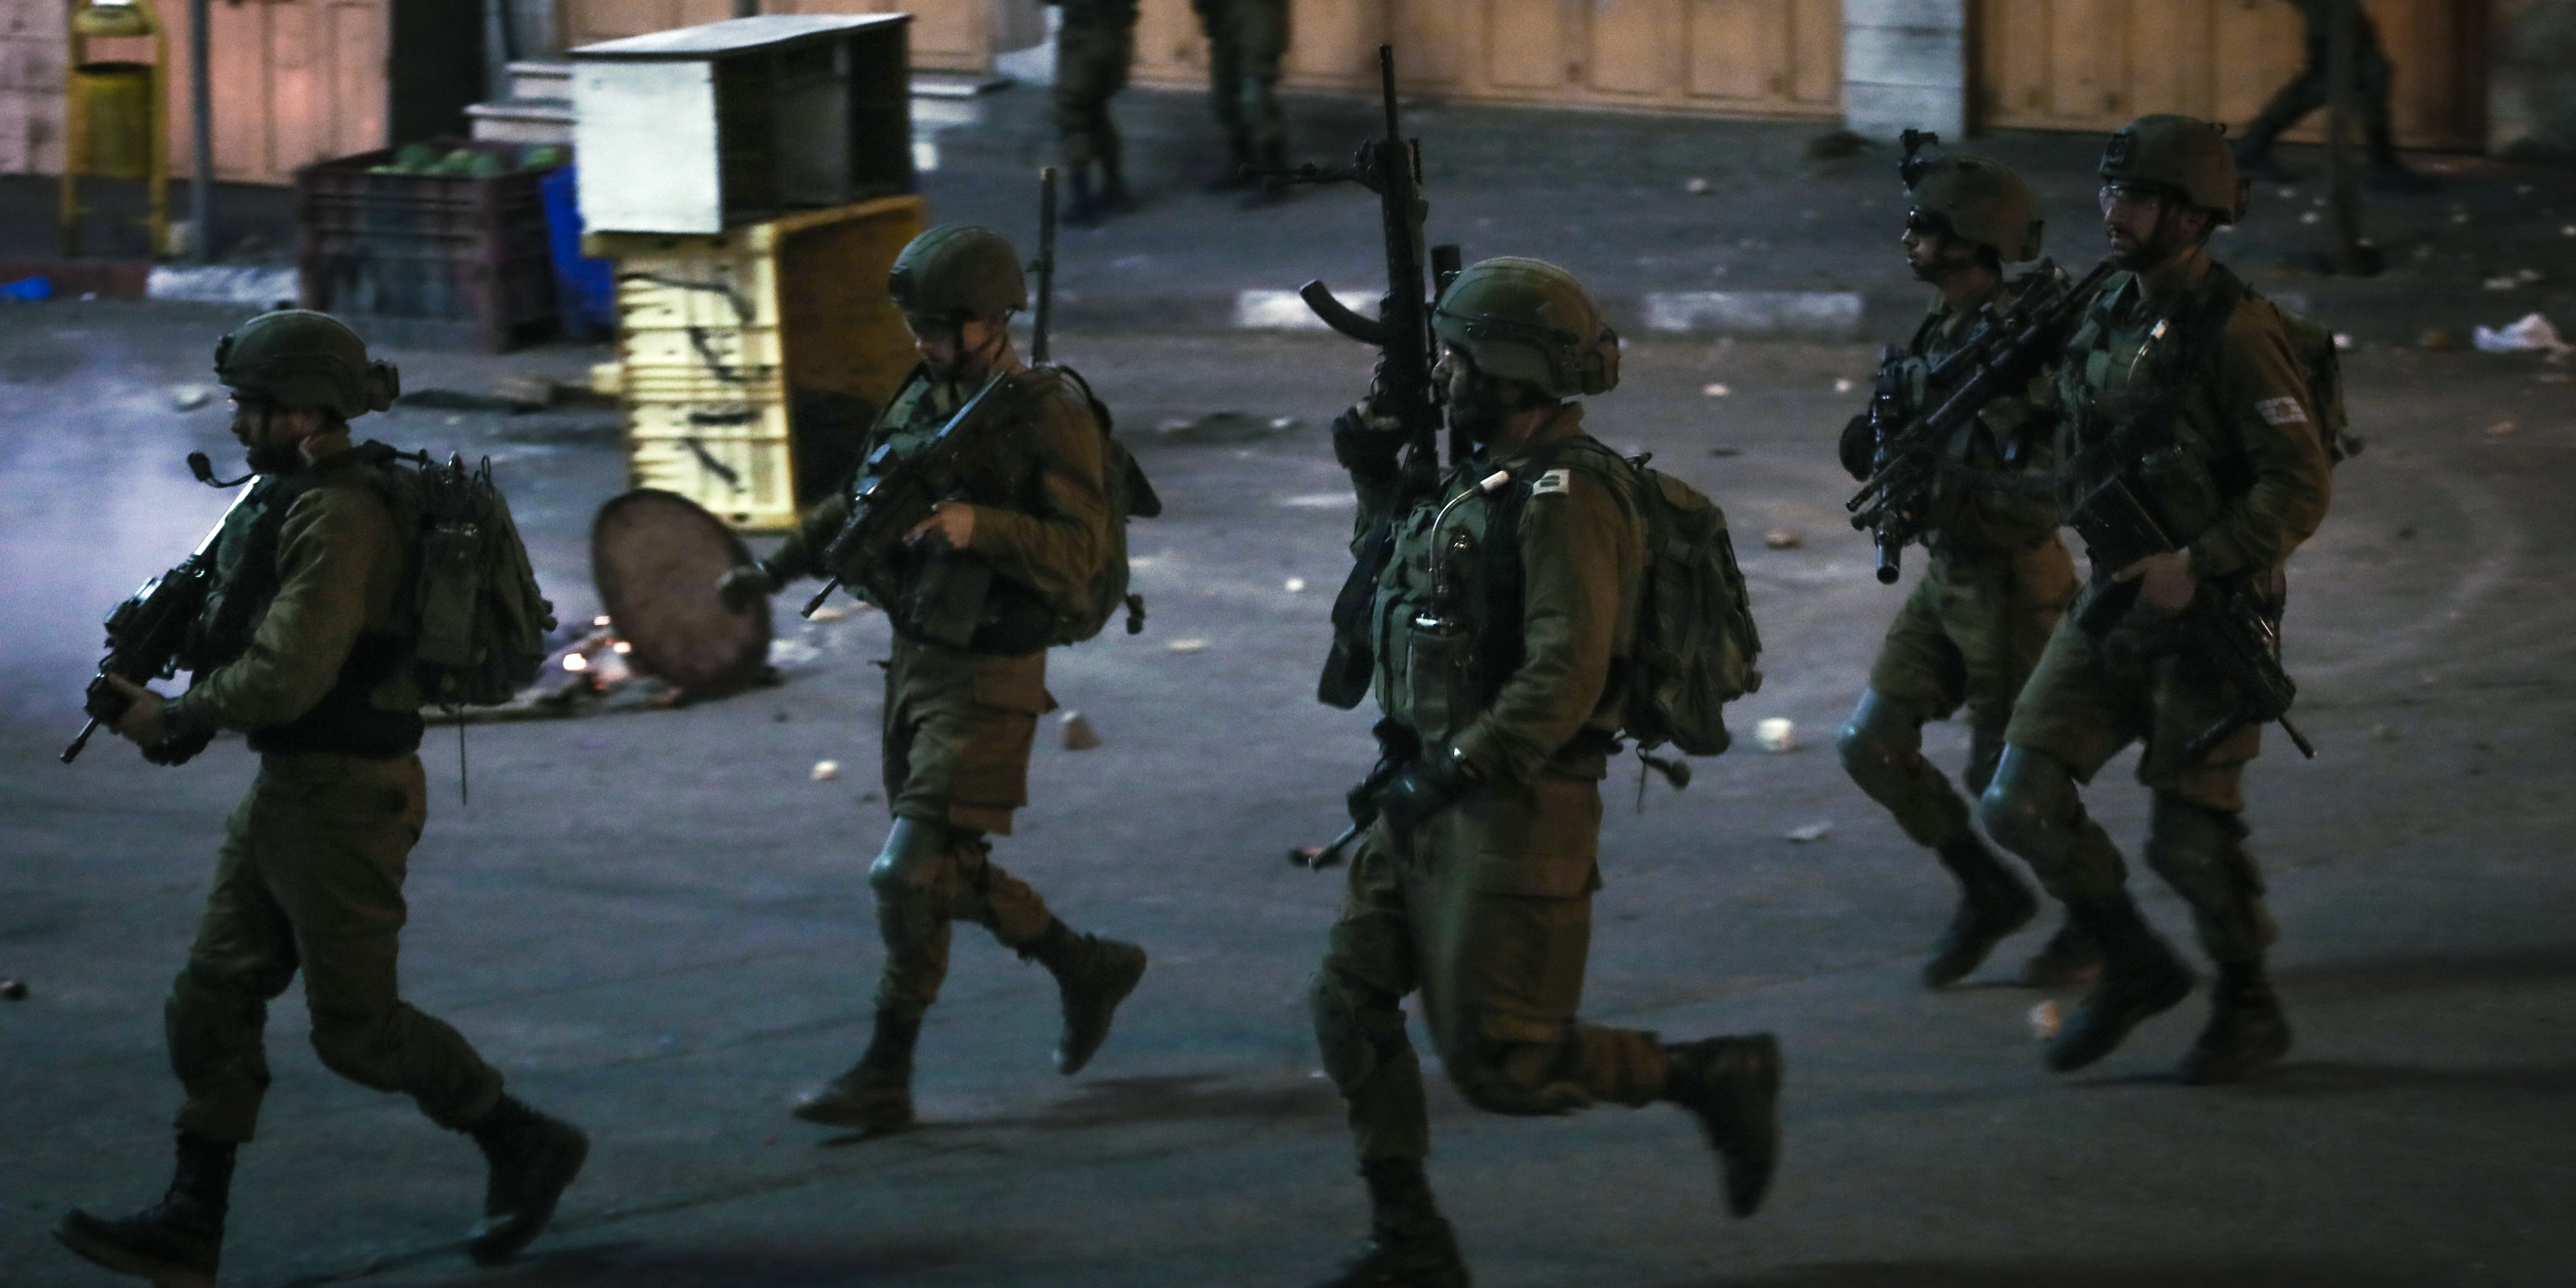 Israeli soldiers are seen during an anti-Israel protest in the West Bank city of Hebron, on May 14, 2021. Tension between Israelis and Palestinians has been flaring up over the past few days amid the escalating violence in East Jerusalem between Palestinian demonstrators and Israeli forces. (Photo by Mamoun Wazwaz/Xinhua via Getty Images (Xinhua/Mamoun Wazwaz via Getty Images)